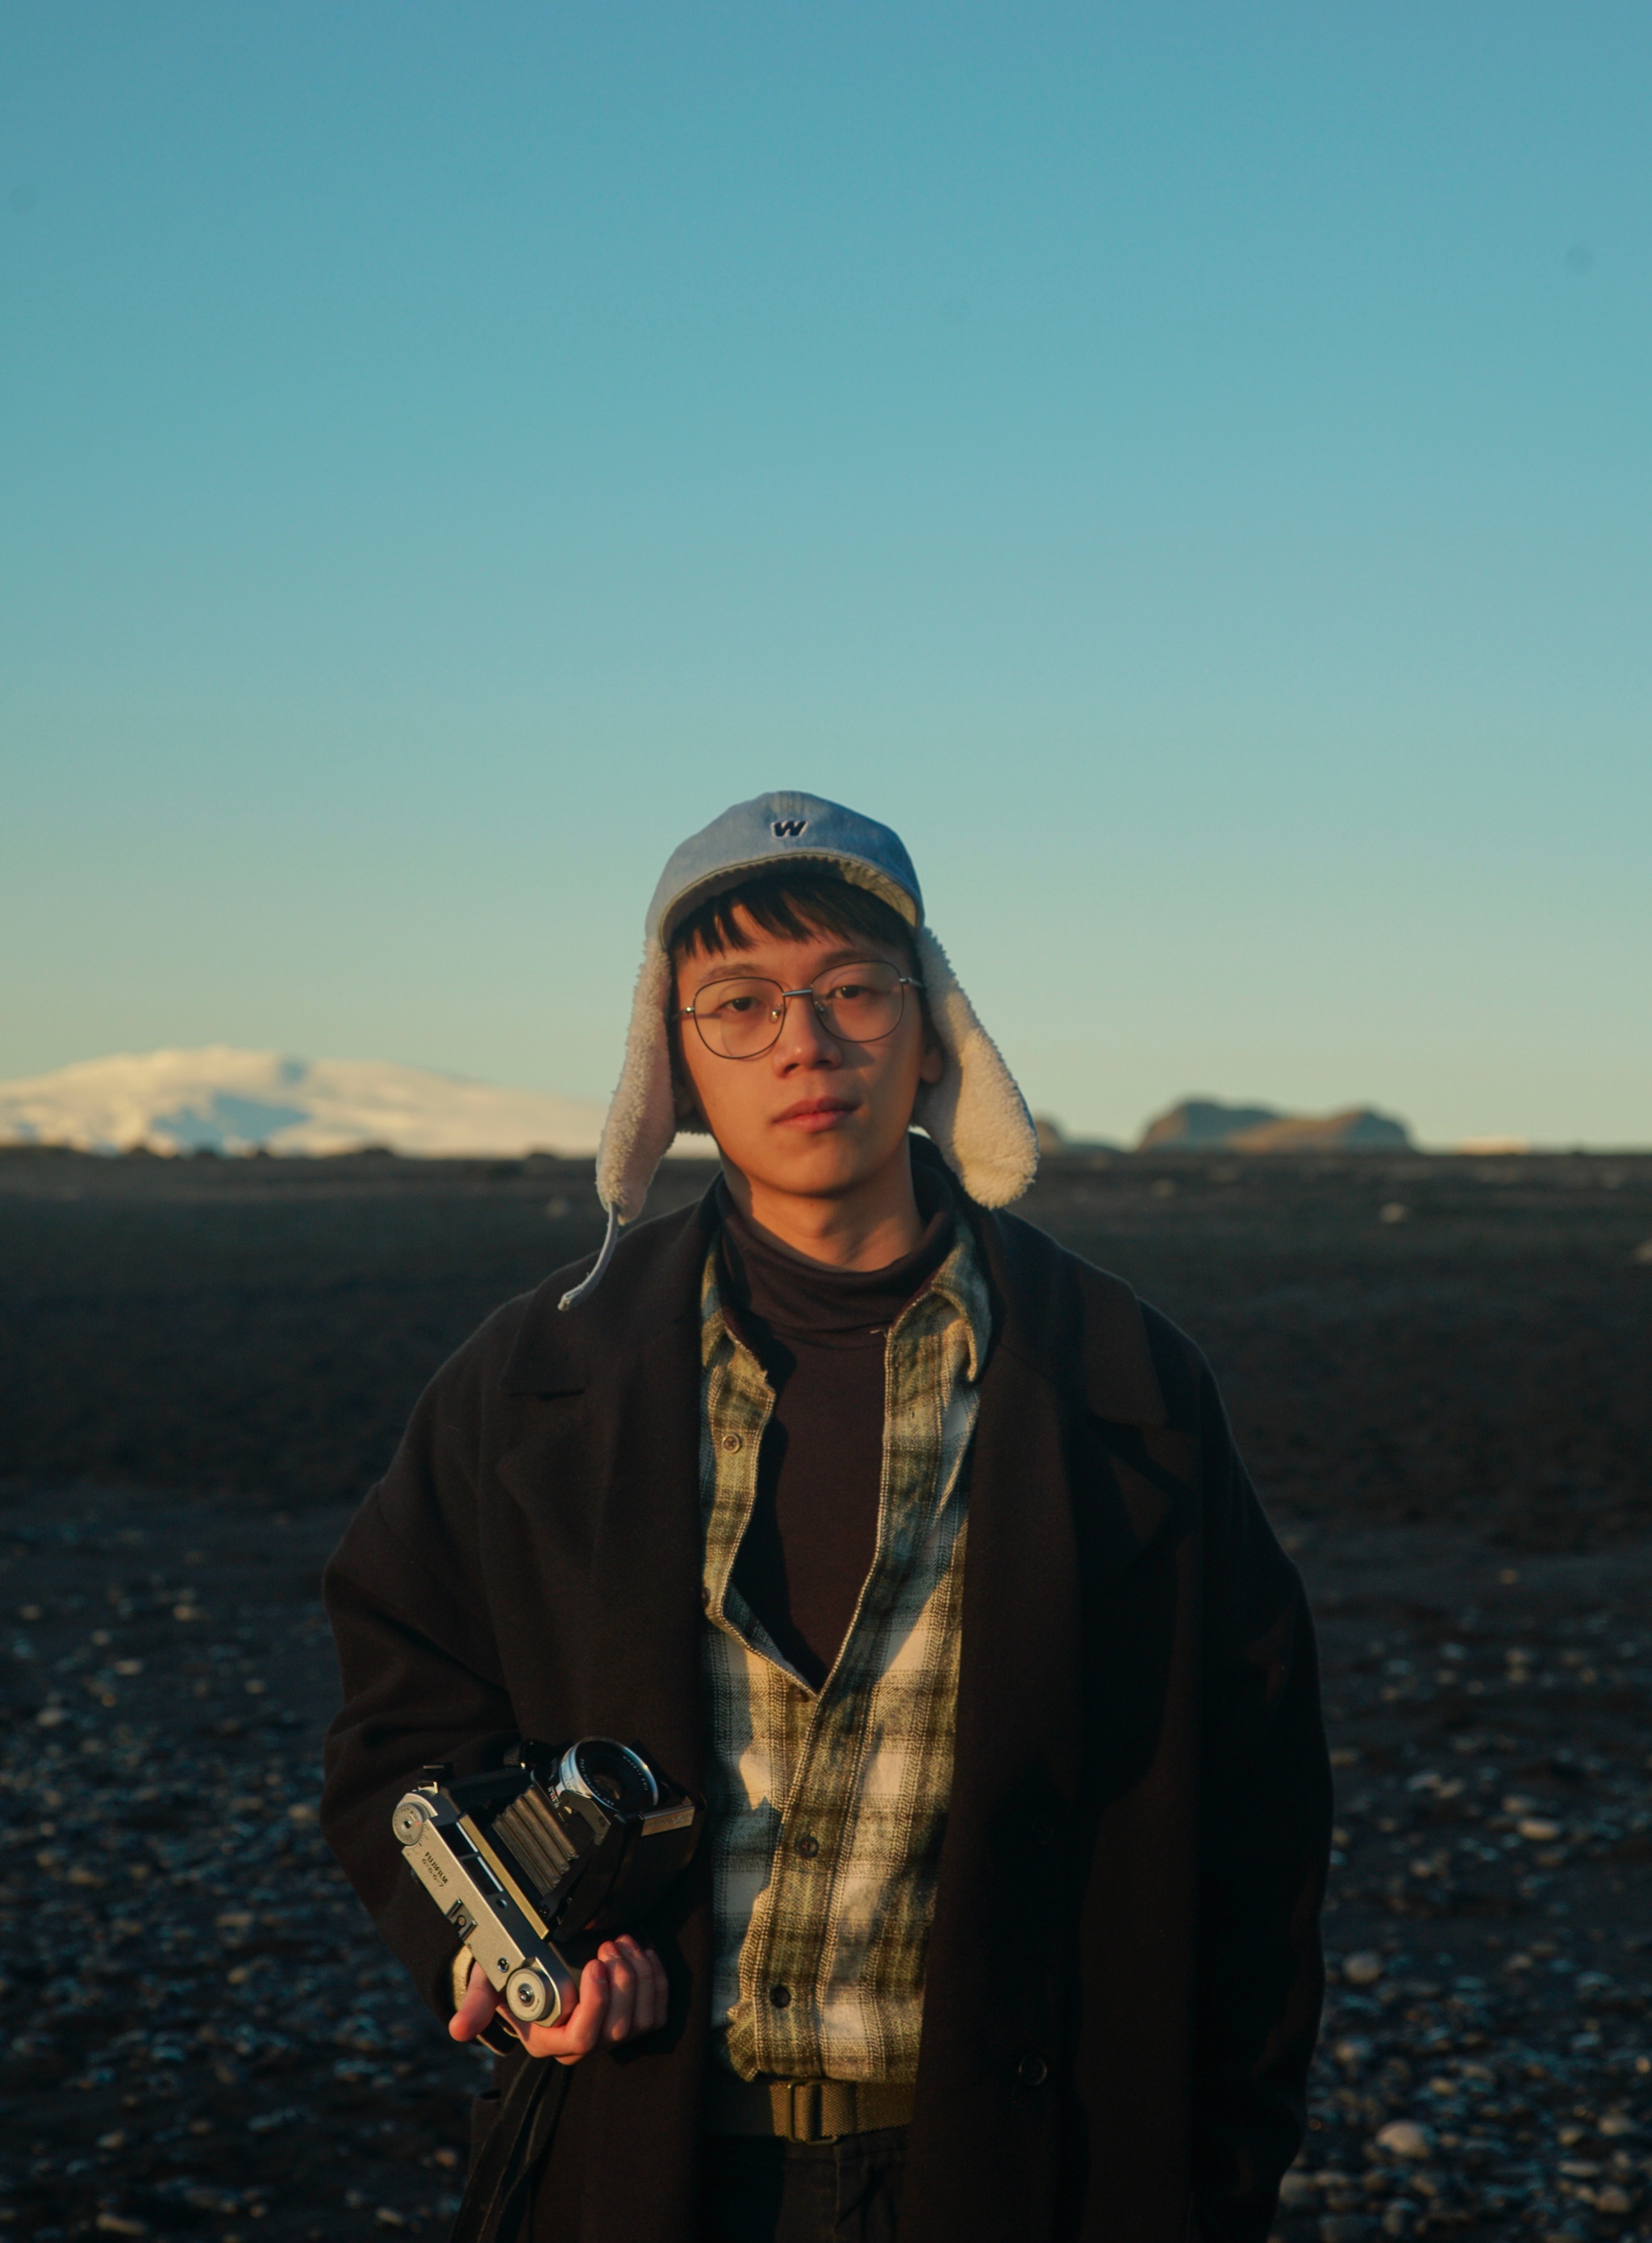 A portrait of a young Chinese American man wearing a jacket, plaid shirt, and hat with ear flaps while holding a camera at his hip. He stands against a vast landscape with a white mountain on the horizon in the distance.